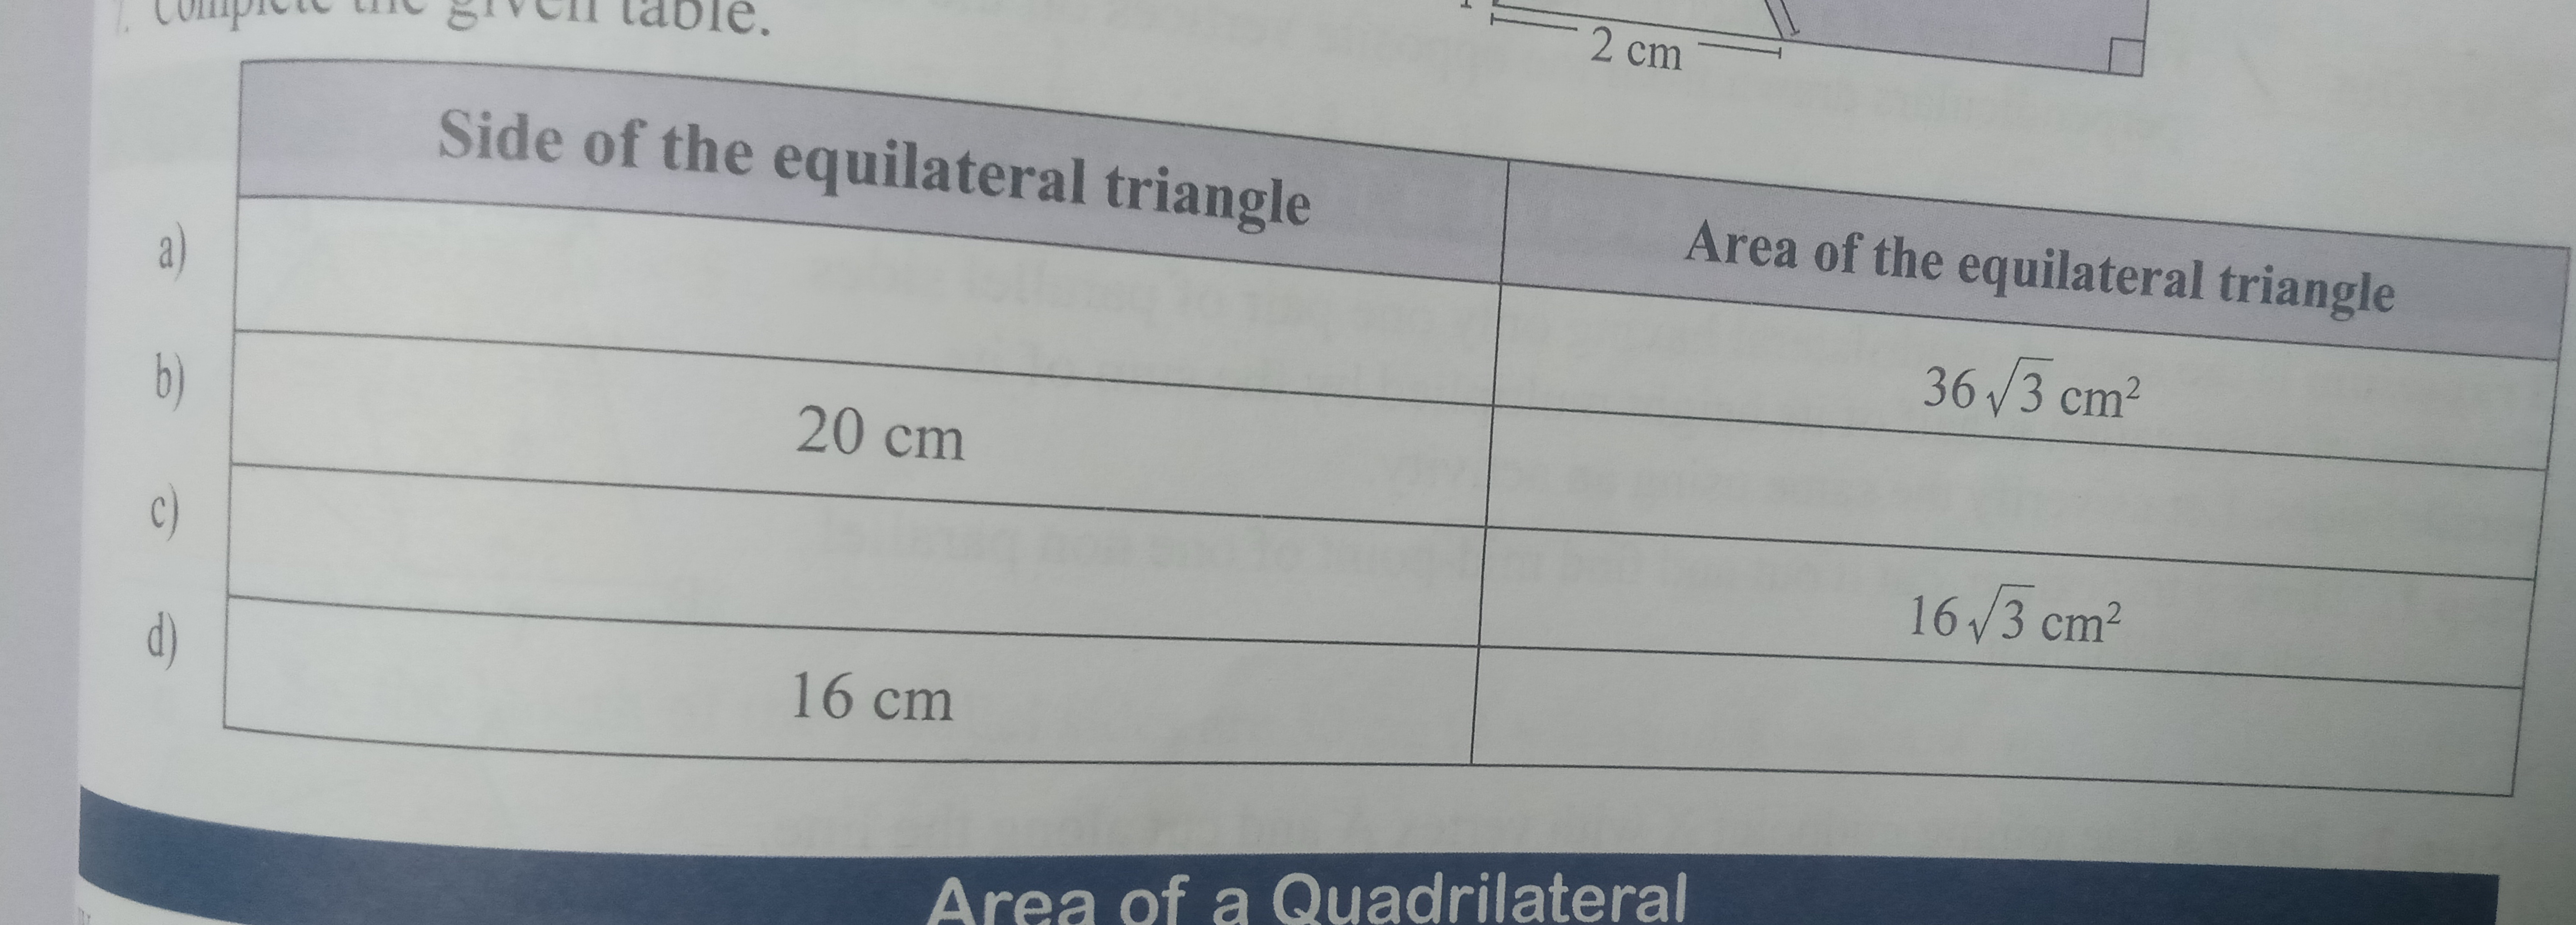 Side of the equilateral triangleArea of the equilateral triangle363​ c